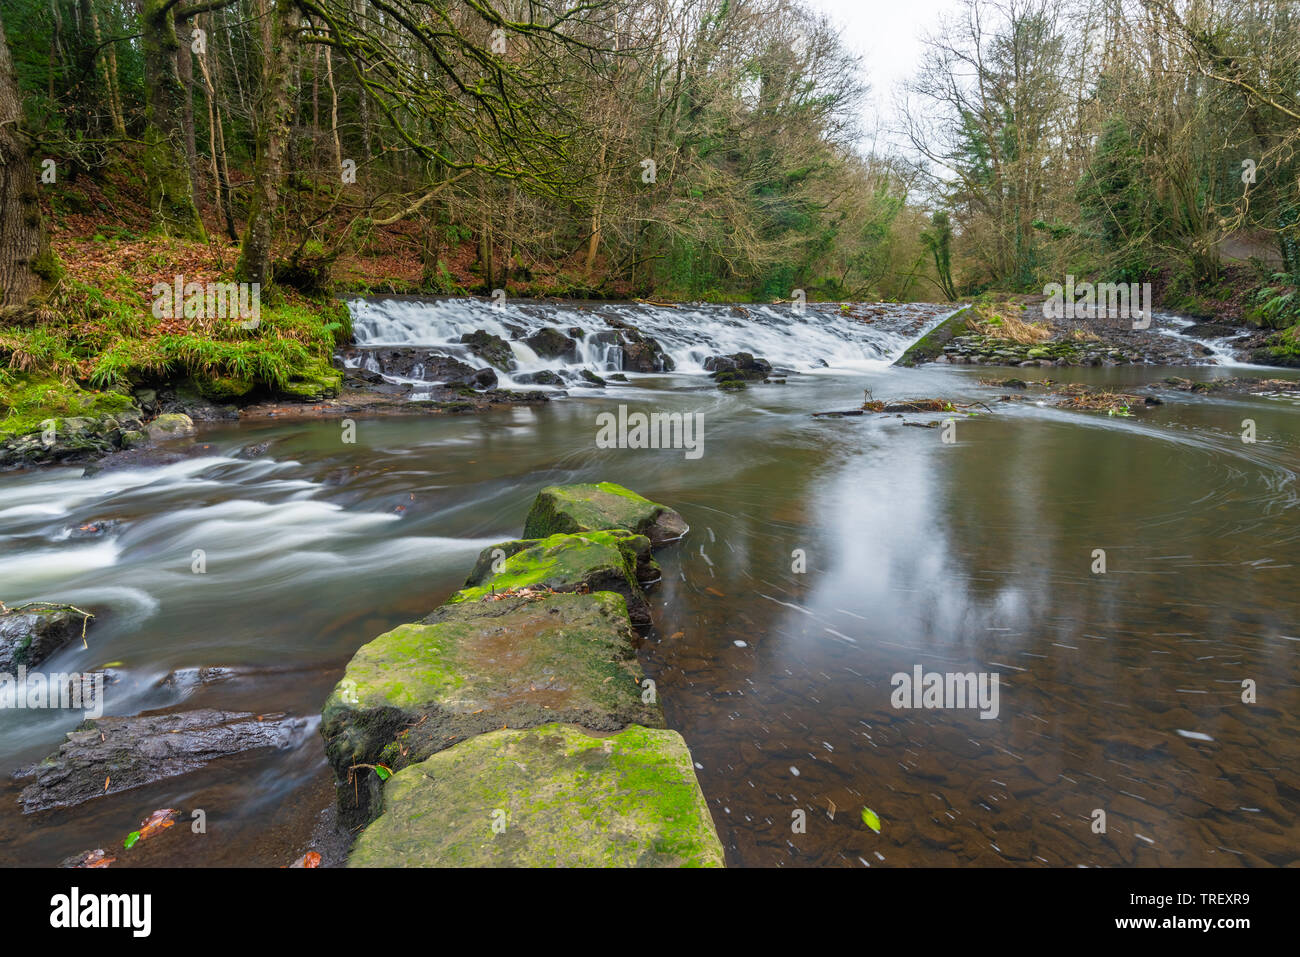 The River Cusher flowing through Clare Glen, Tandragee, County Armagh, Northern Ireland on a cold autumnal day. Stock Photo